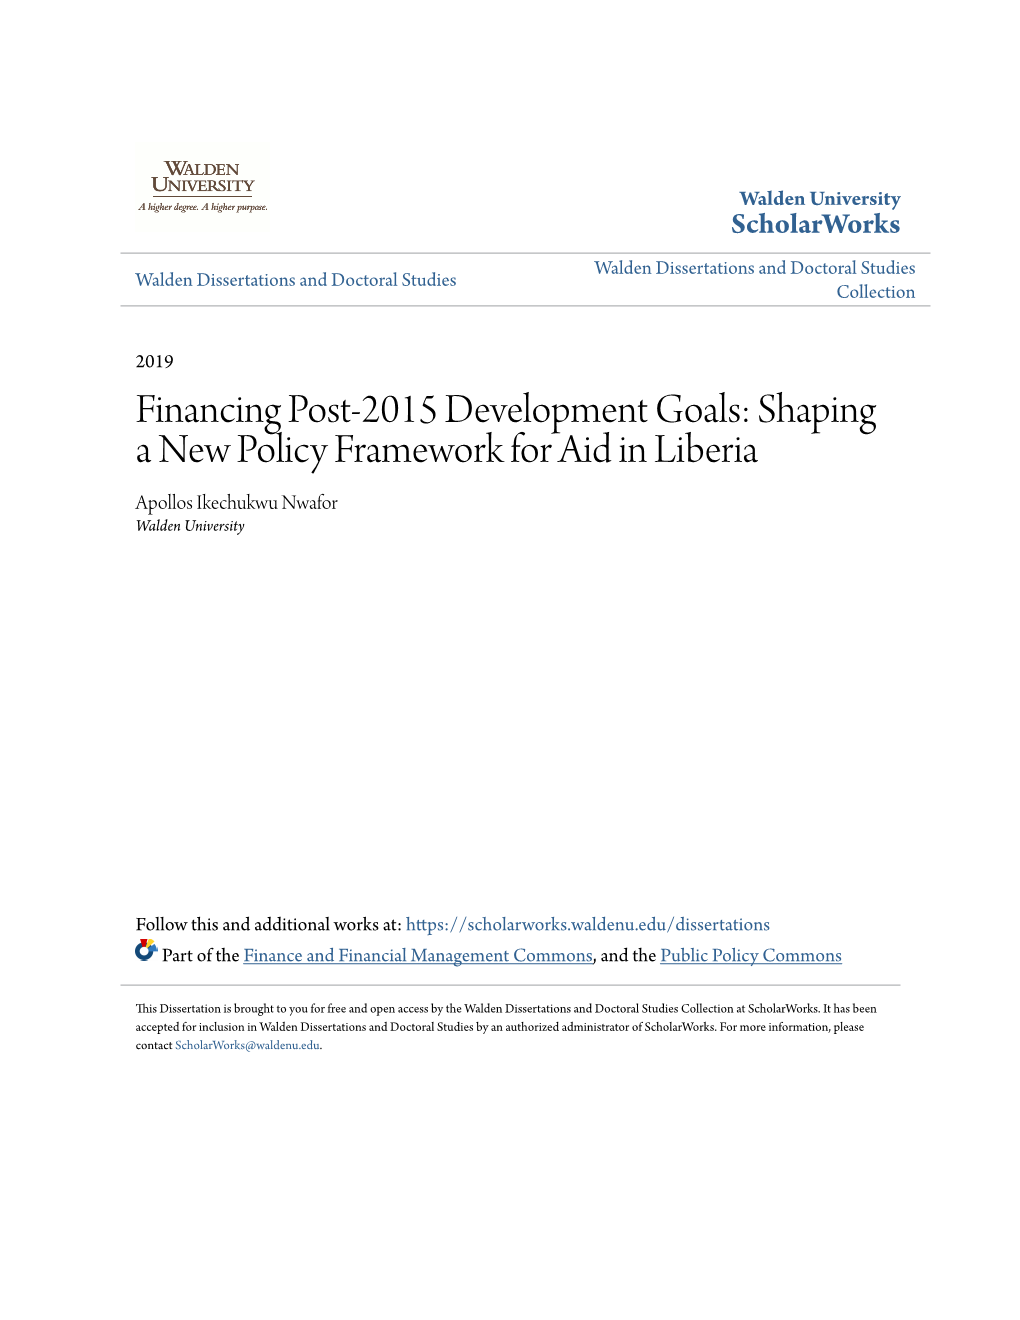 Shaping a New Policy Framework for Aid in Liberia Apollos Ikechukwu Nwafor Walden University